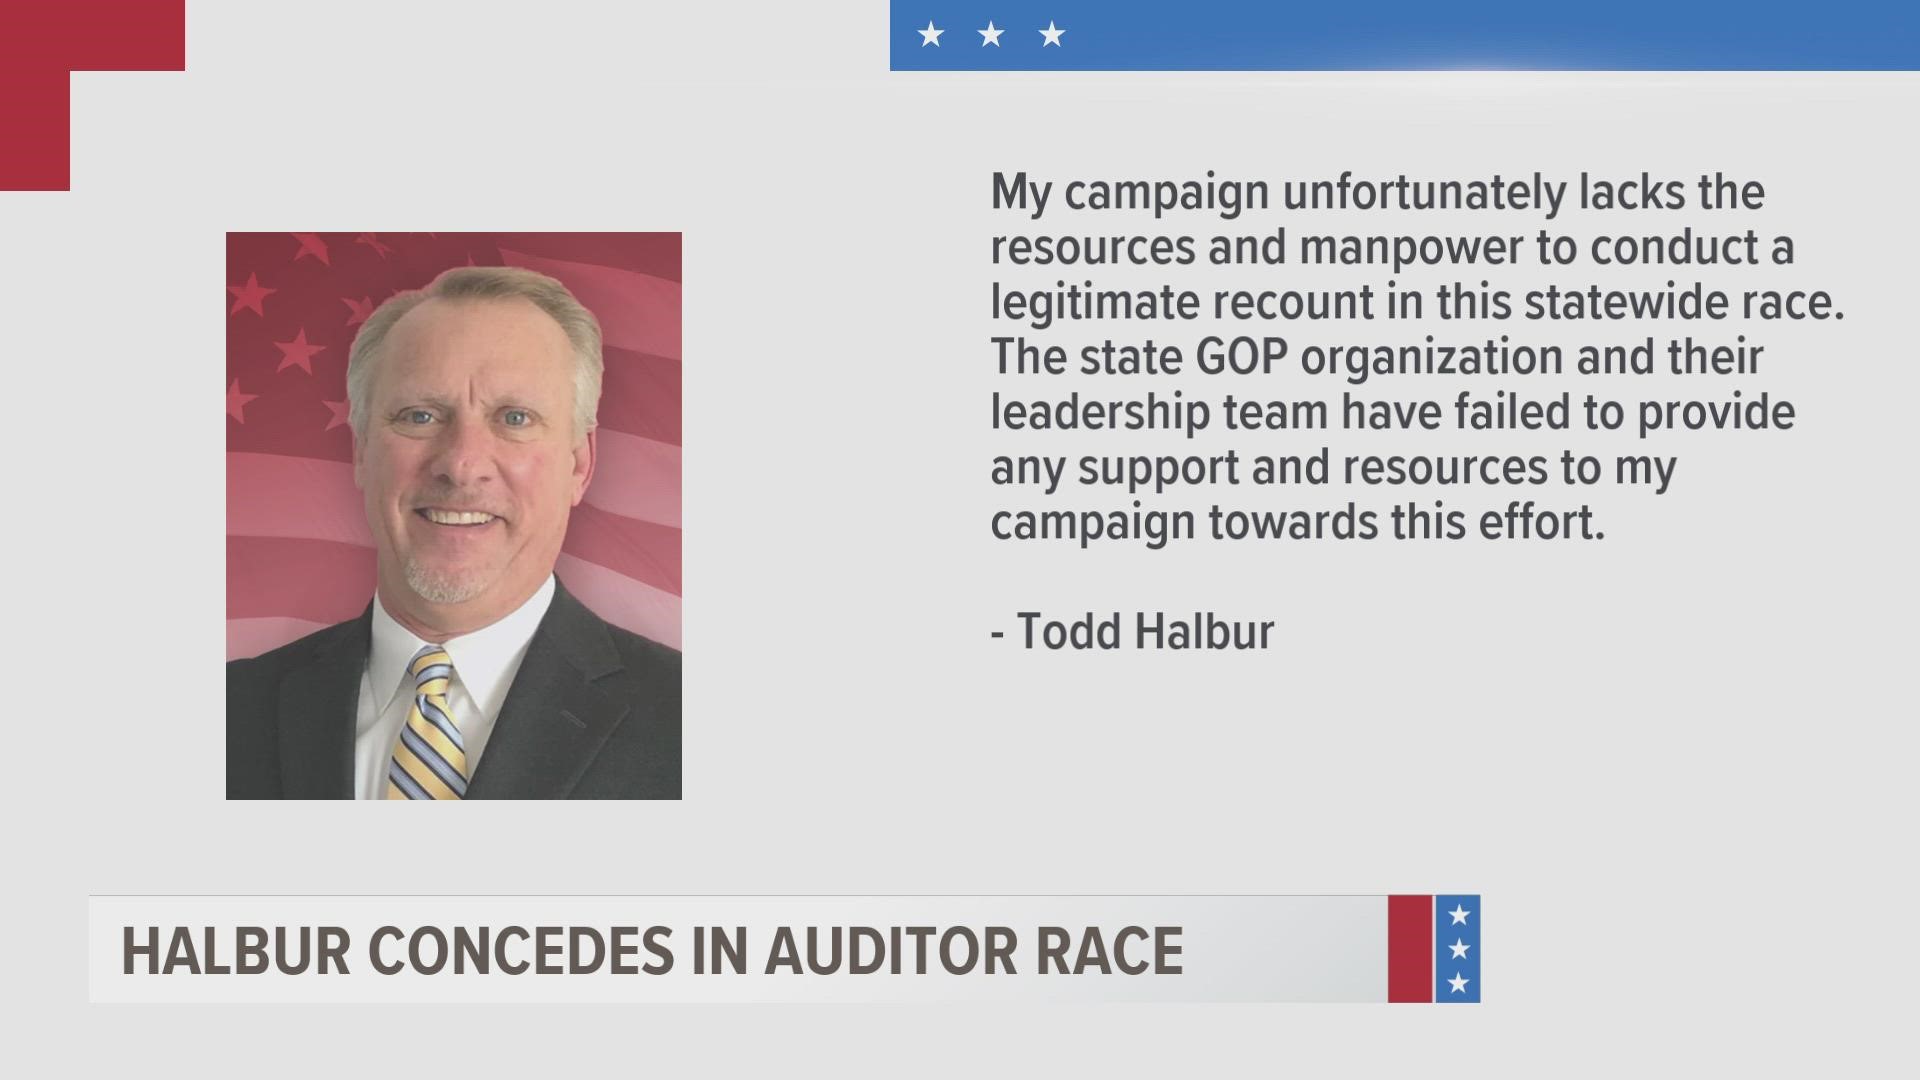 "My campaign unfortunately lacks the resources and manpower to conduct a legitimate recount in this statewide race," Halbur wrote in a Facebook post Friday.